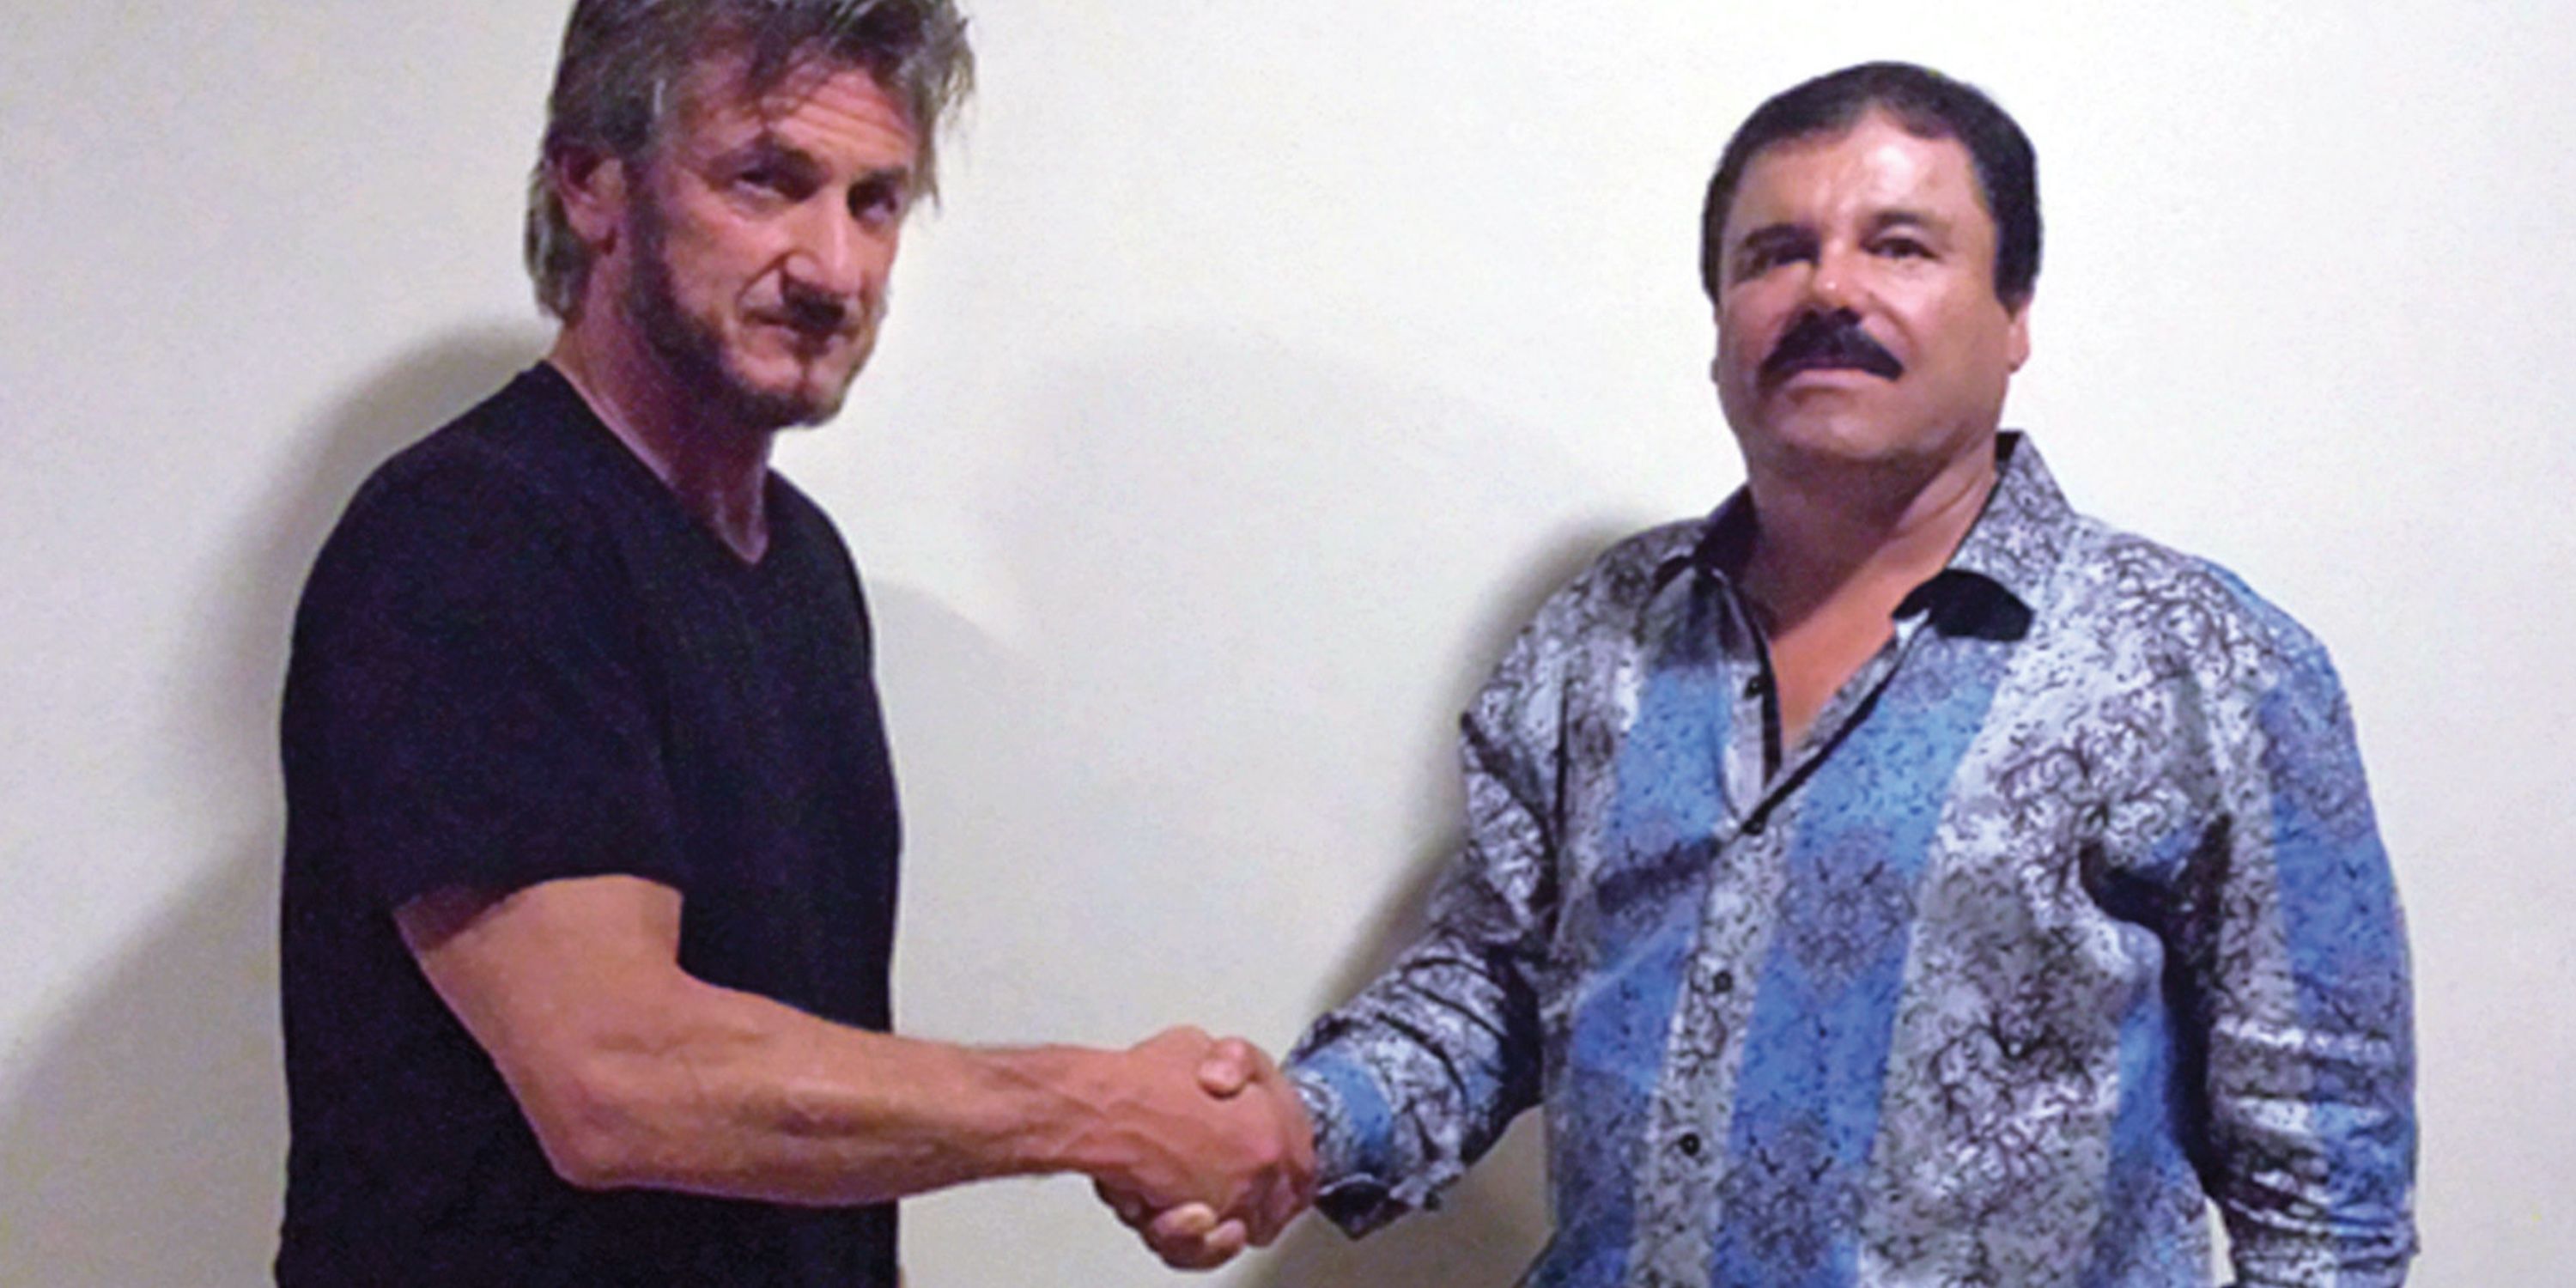 Netflixs World’s Most Wanted El Chapo’s Meeting With Sean Penn Explained